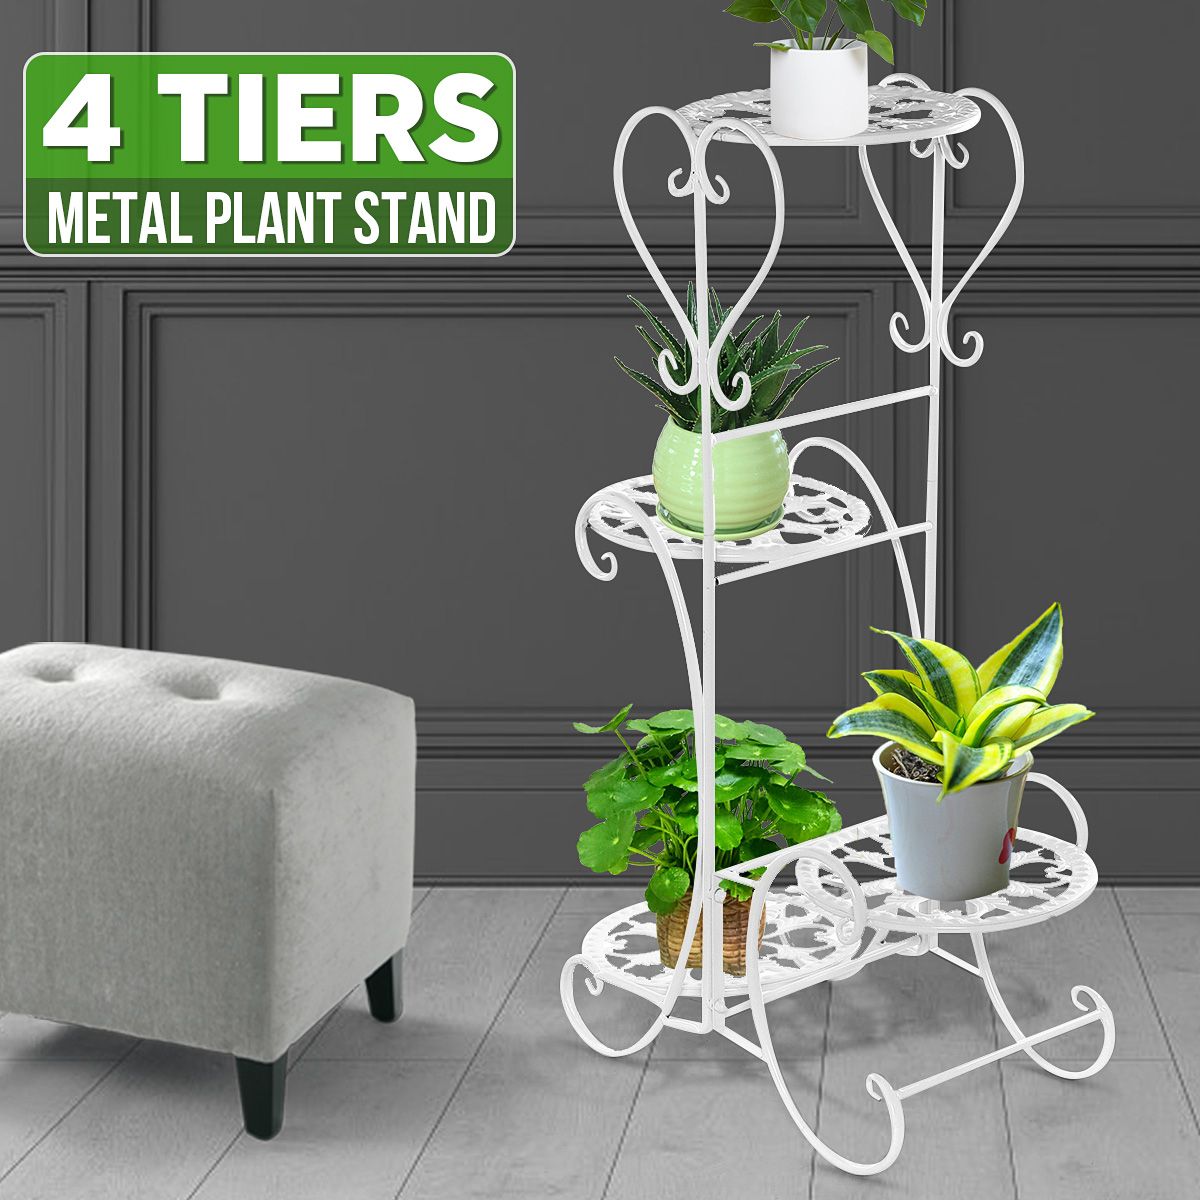 4 Tier Metal Plant Stand Flower Shelves Pot Holder For Small Planters  Succulents Display Indoor Home Patio Garden,Black/ White/ Coffee –  Walmart Throughout Four Tier Metal Plant Stands (View 15 of 15)